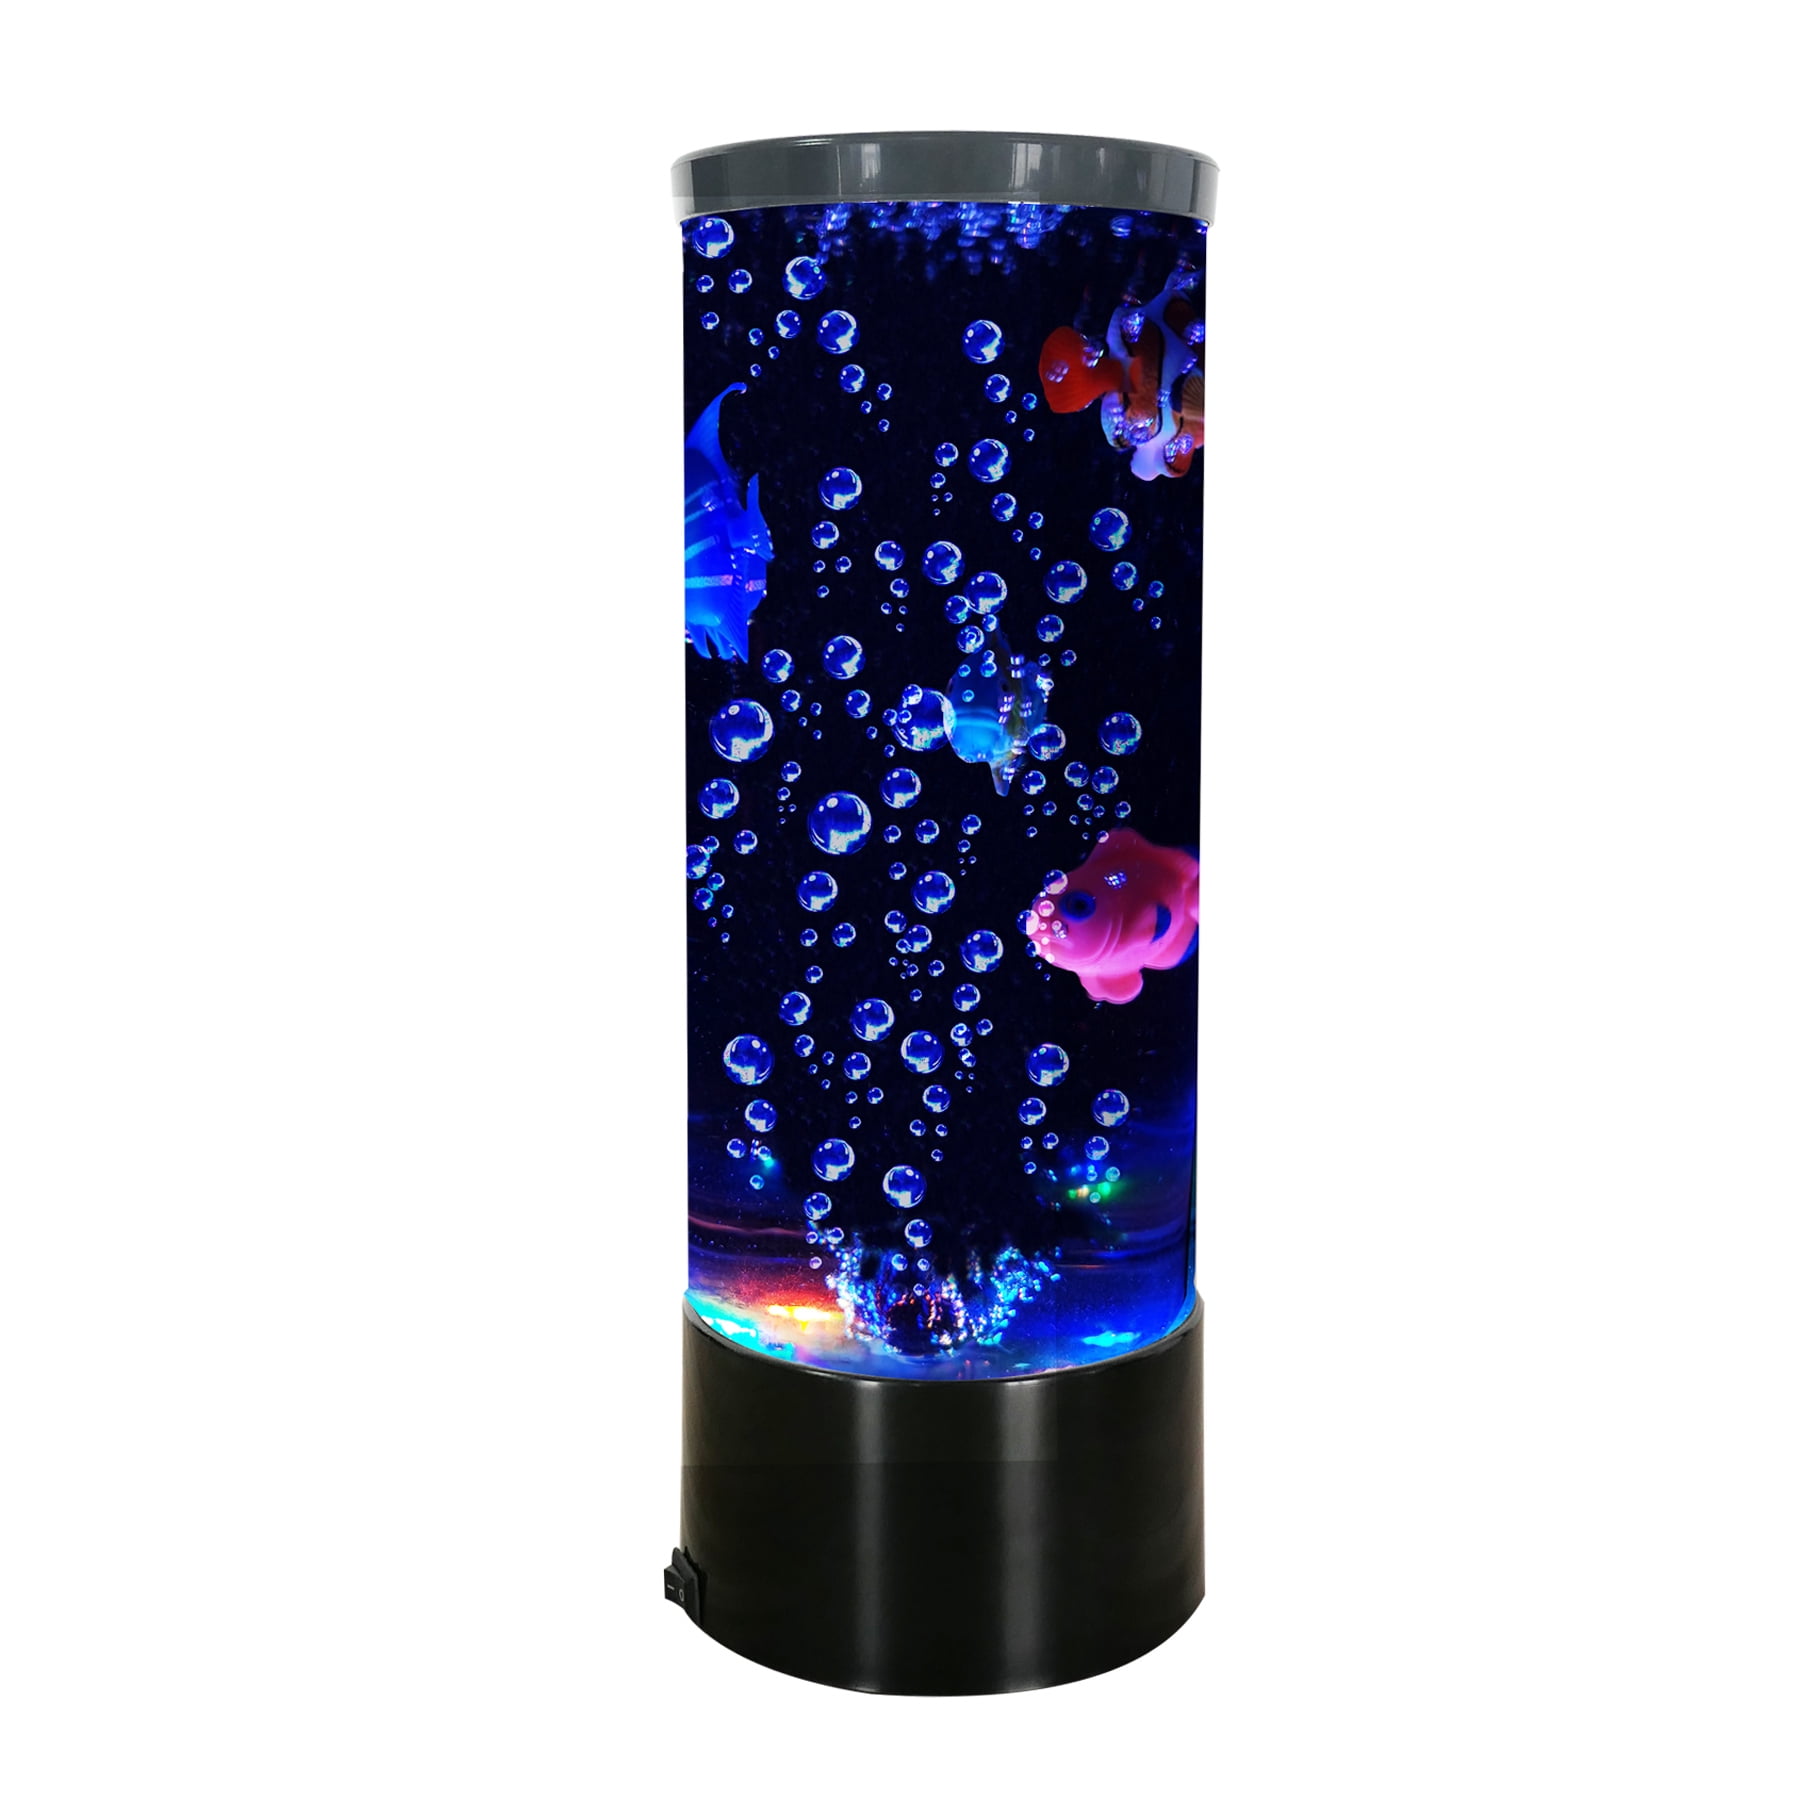 Lava the Original 14.5-Inch Colormax Lamp with Rainbow Decal Base 